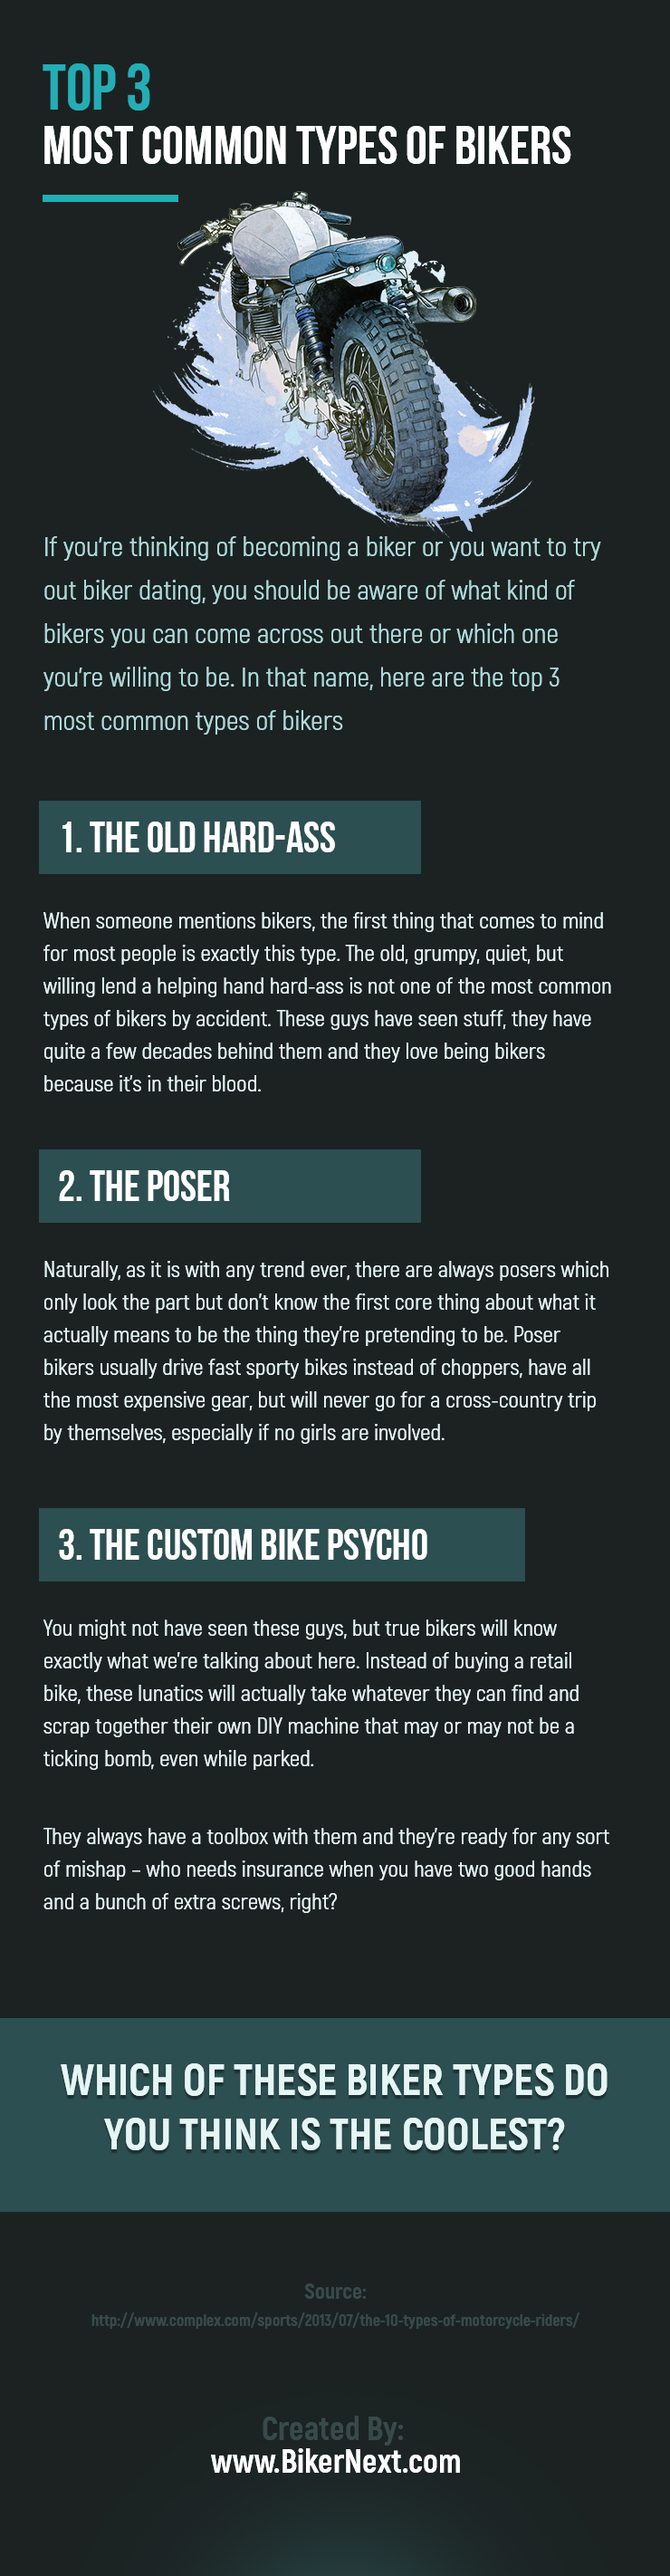 Top 3 Most Common Types of Bikers